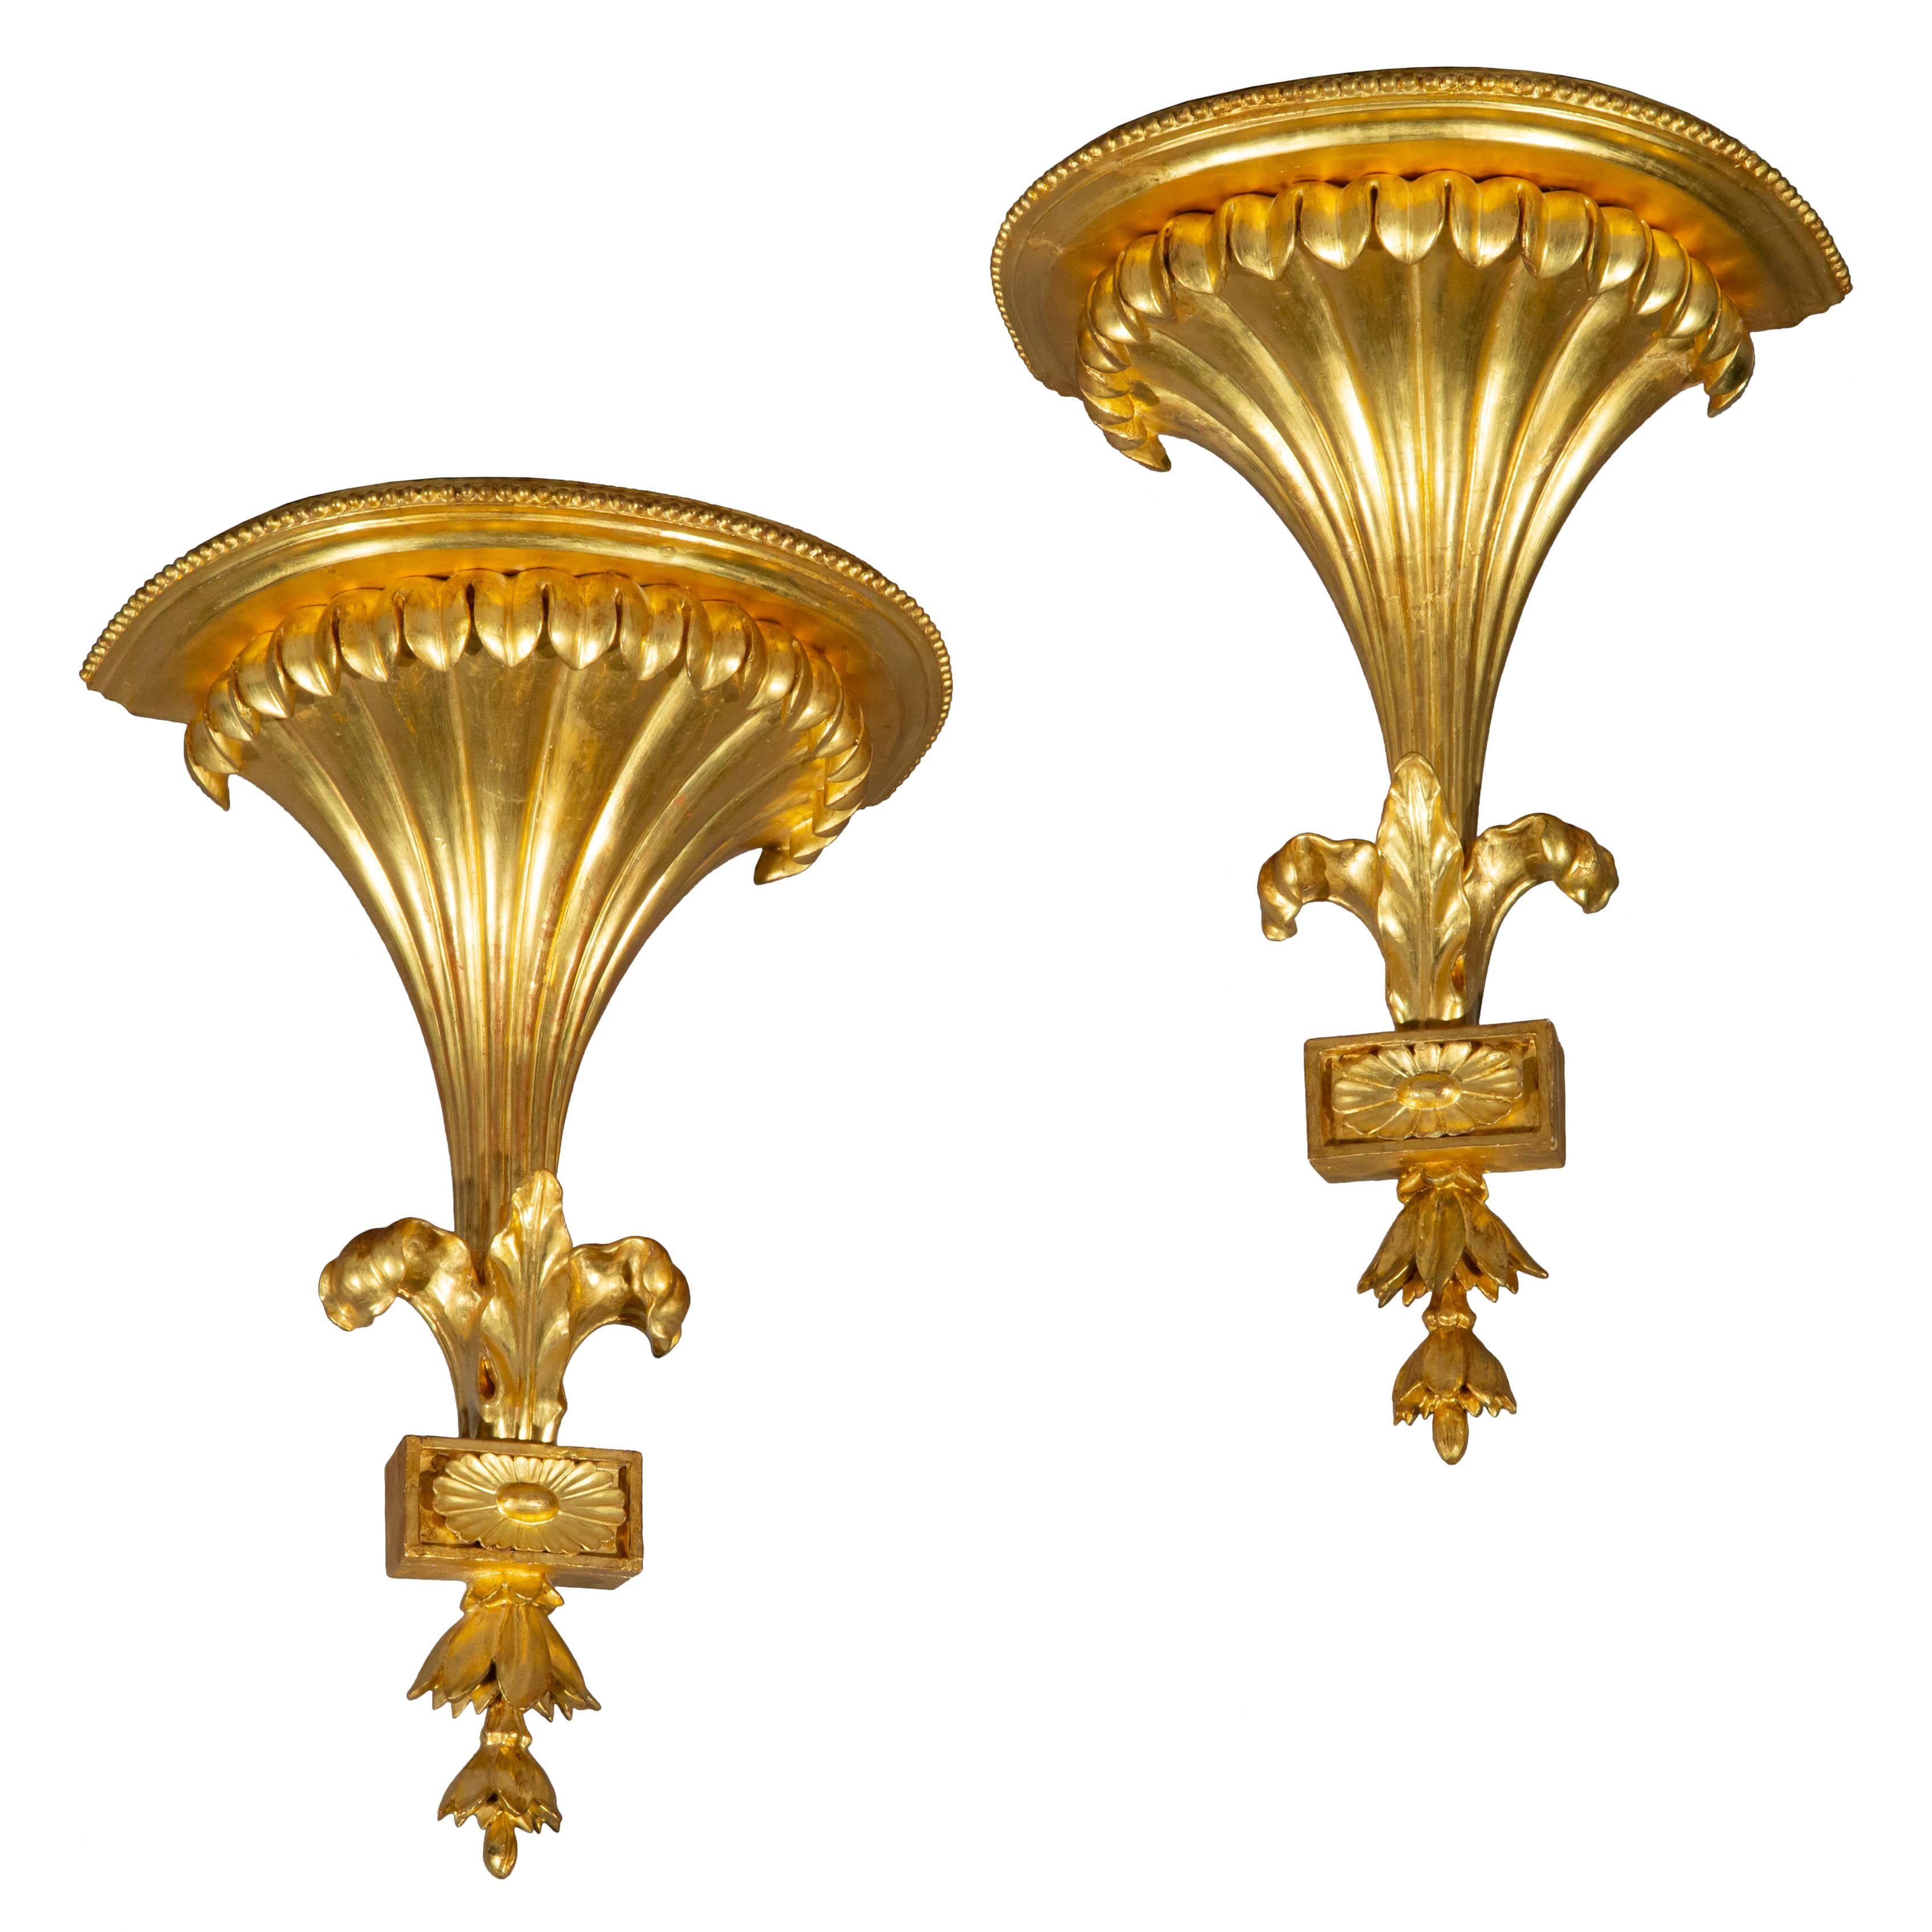 Pair of Antique Regency Wall Brackets or Sconces